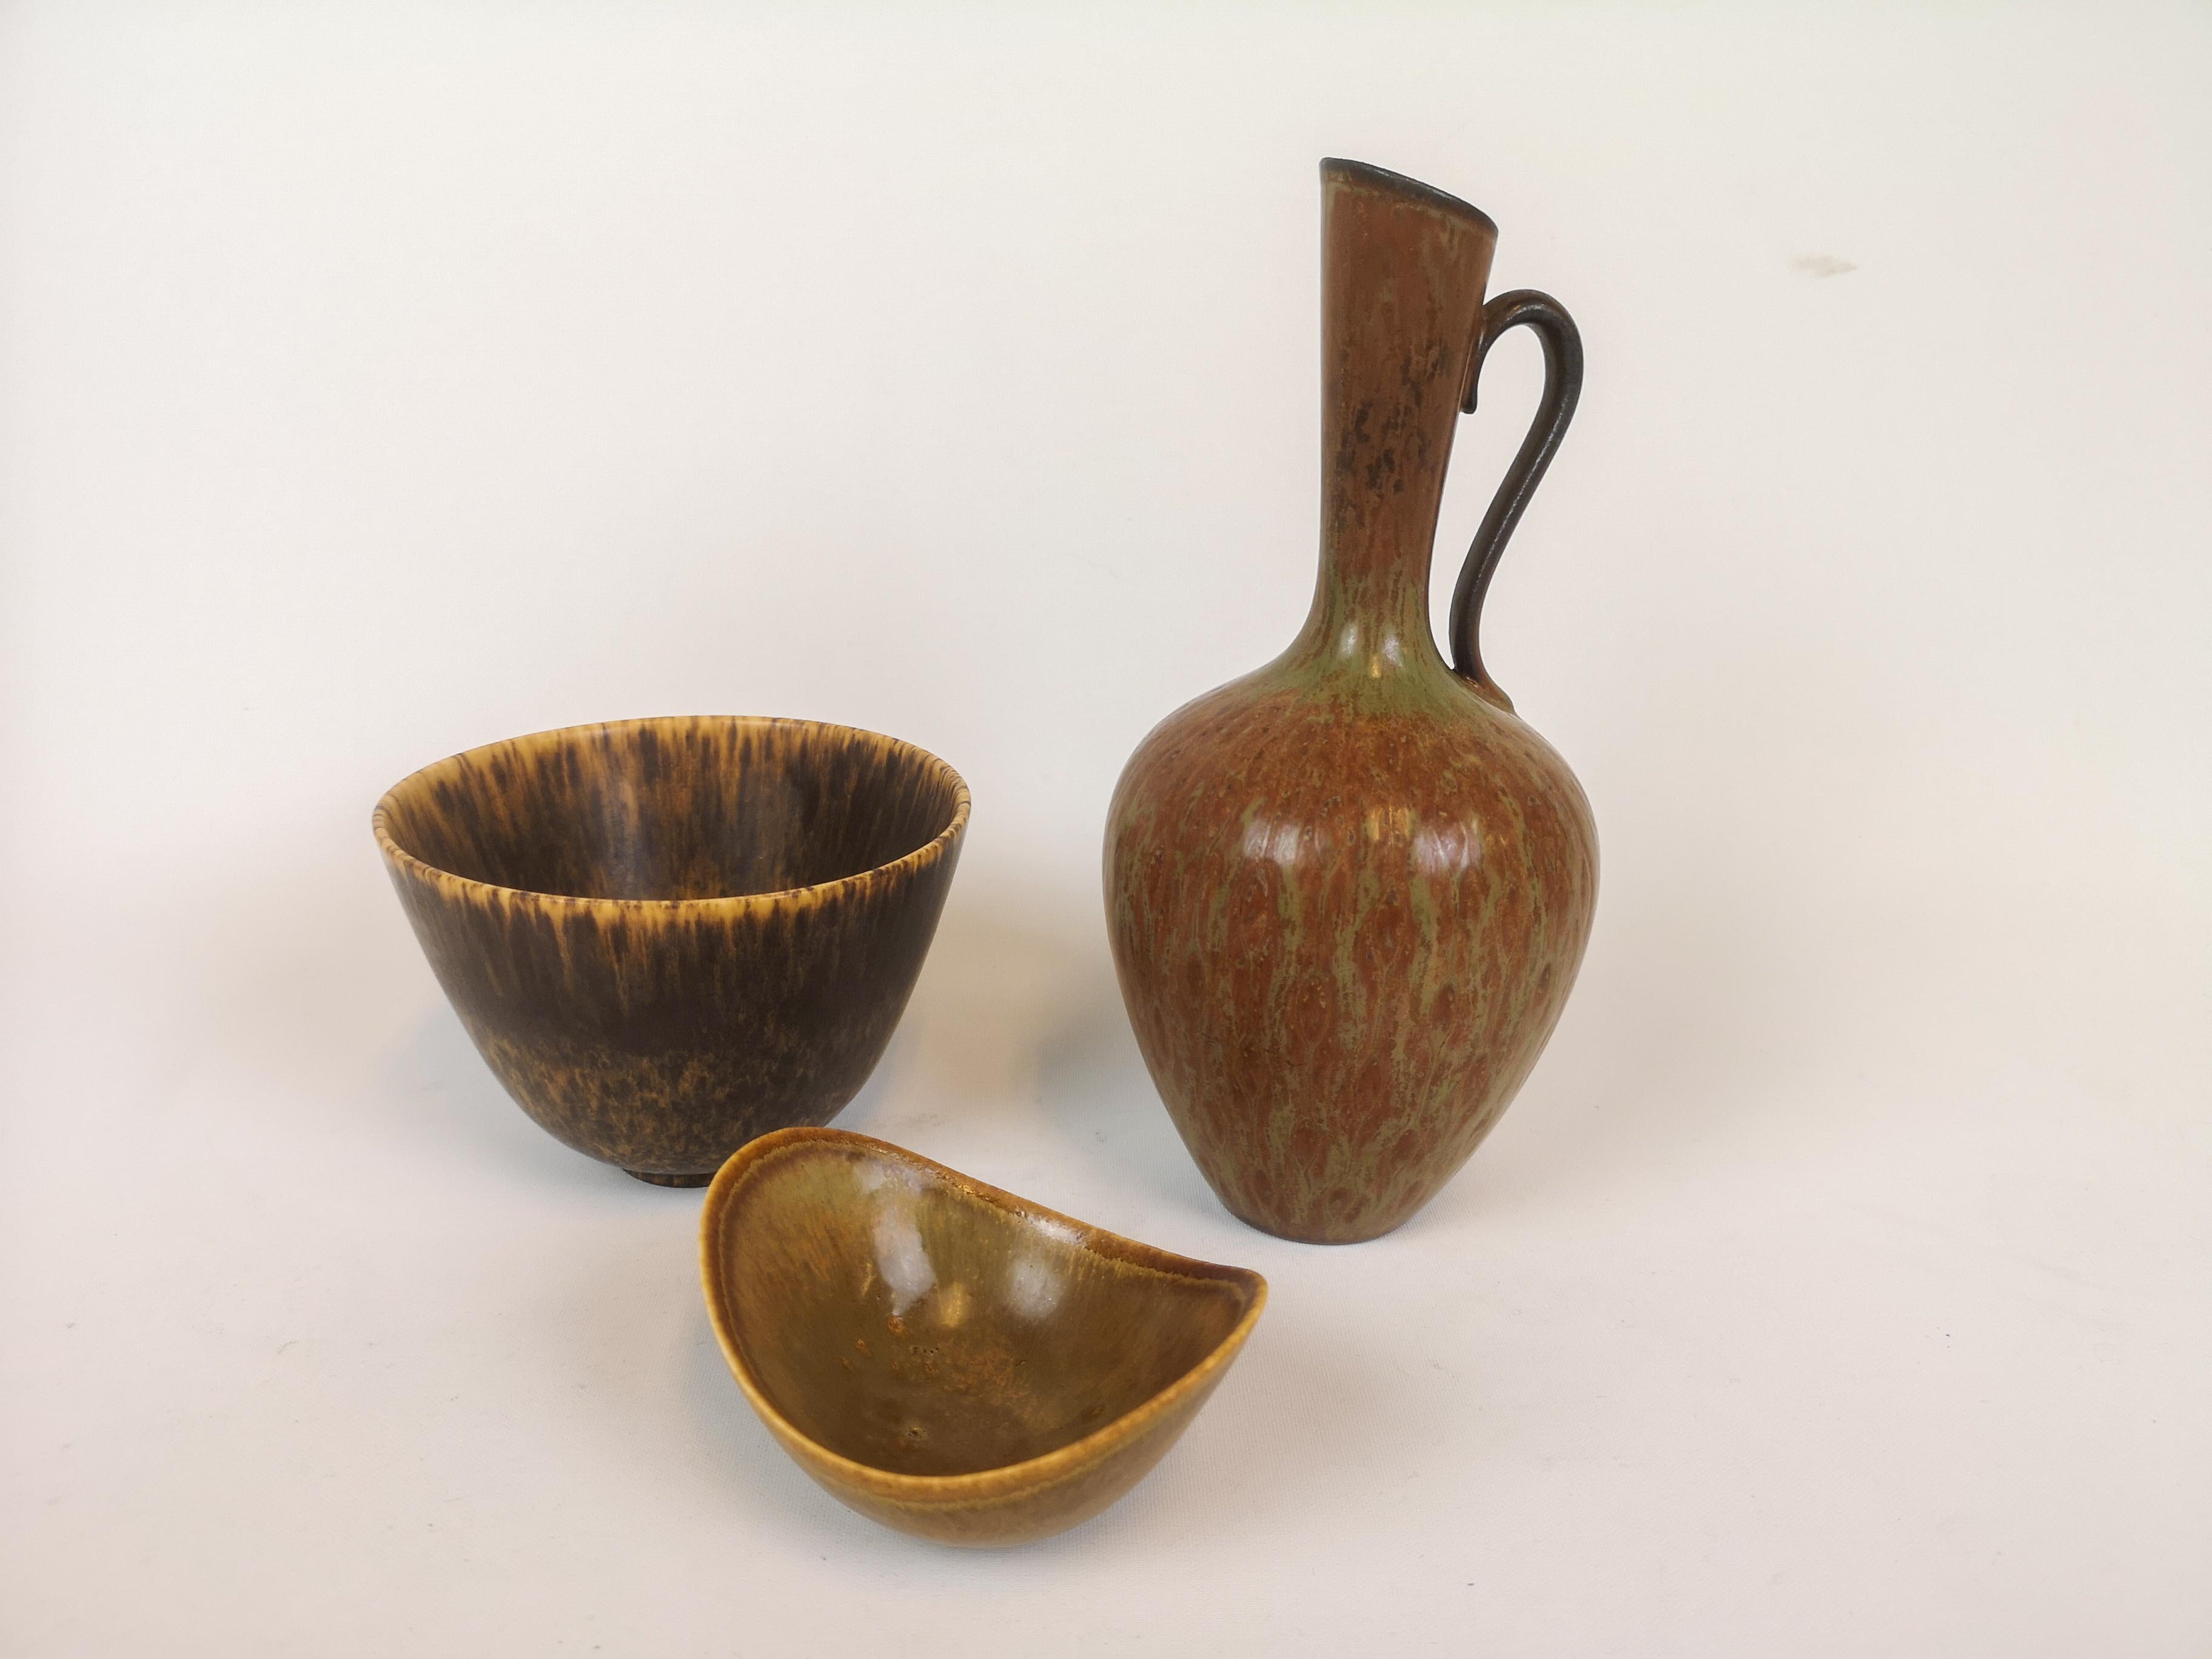 Three wonderful pieces made in Sweden during the 1950s at Rörstrand factory and designed by Gunnar Nylund.

The objects have a wonderful form and glaze. 

Good condition. 

Measures: Vases H 23, D 10, bowl H 9 cm, D 12 cm.